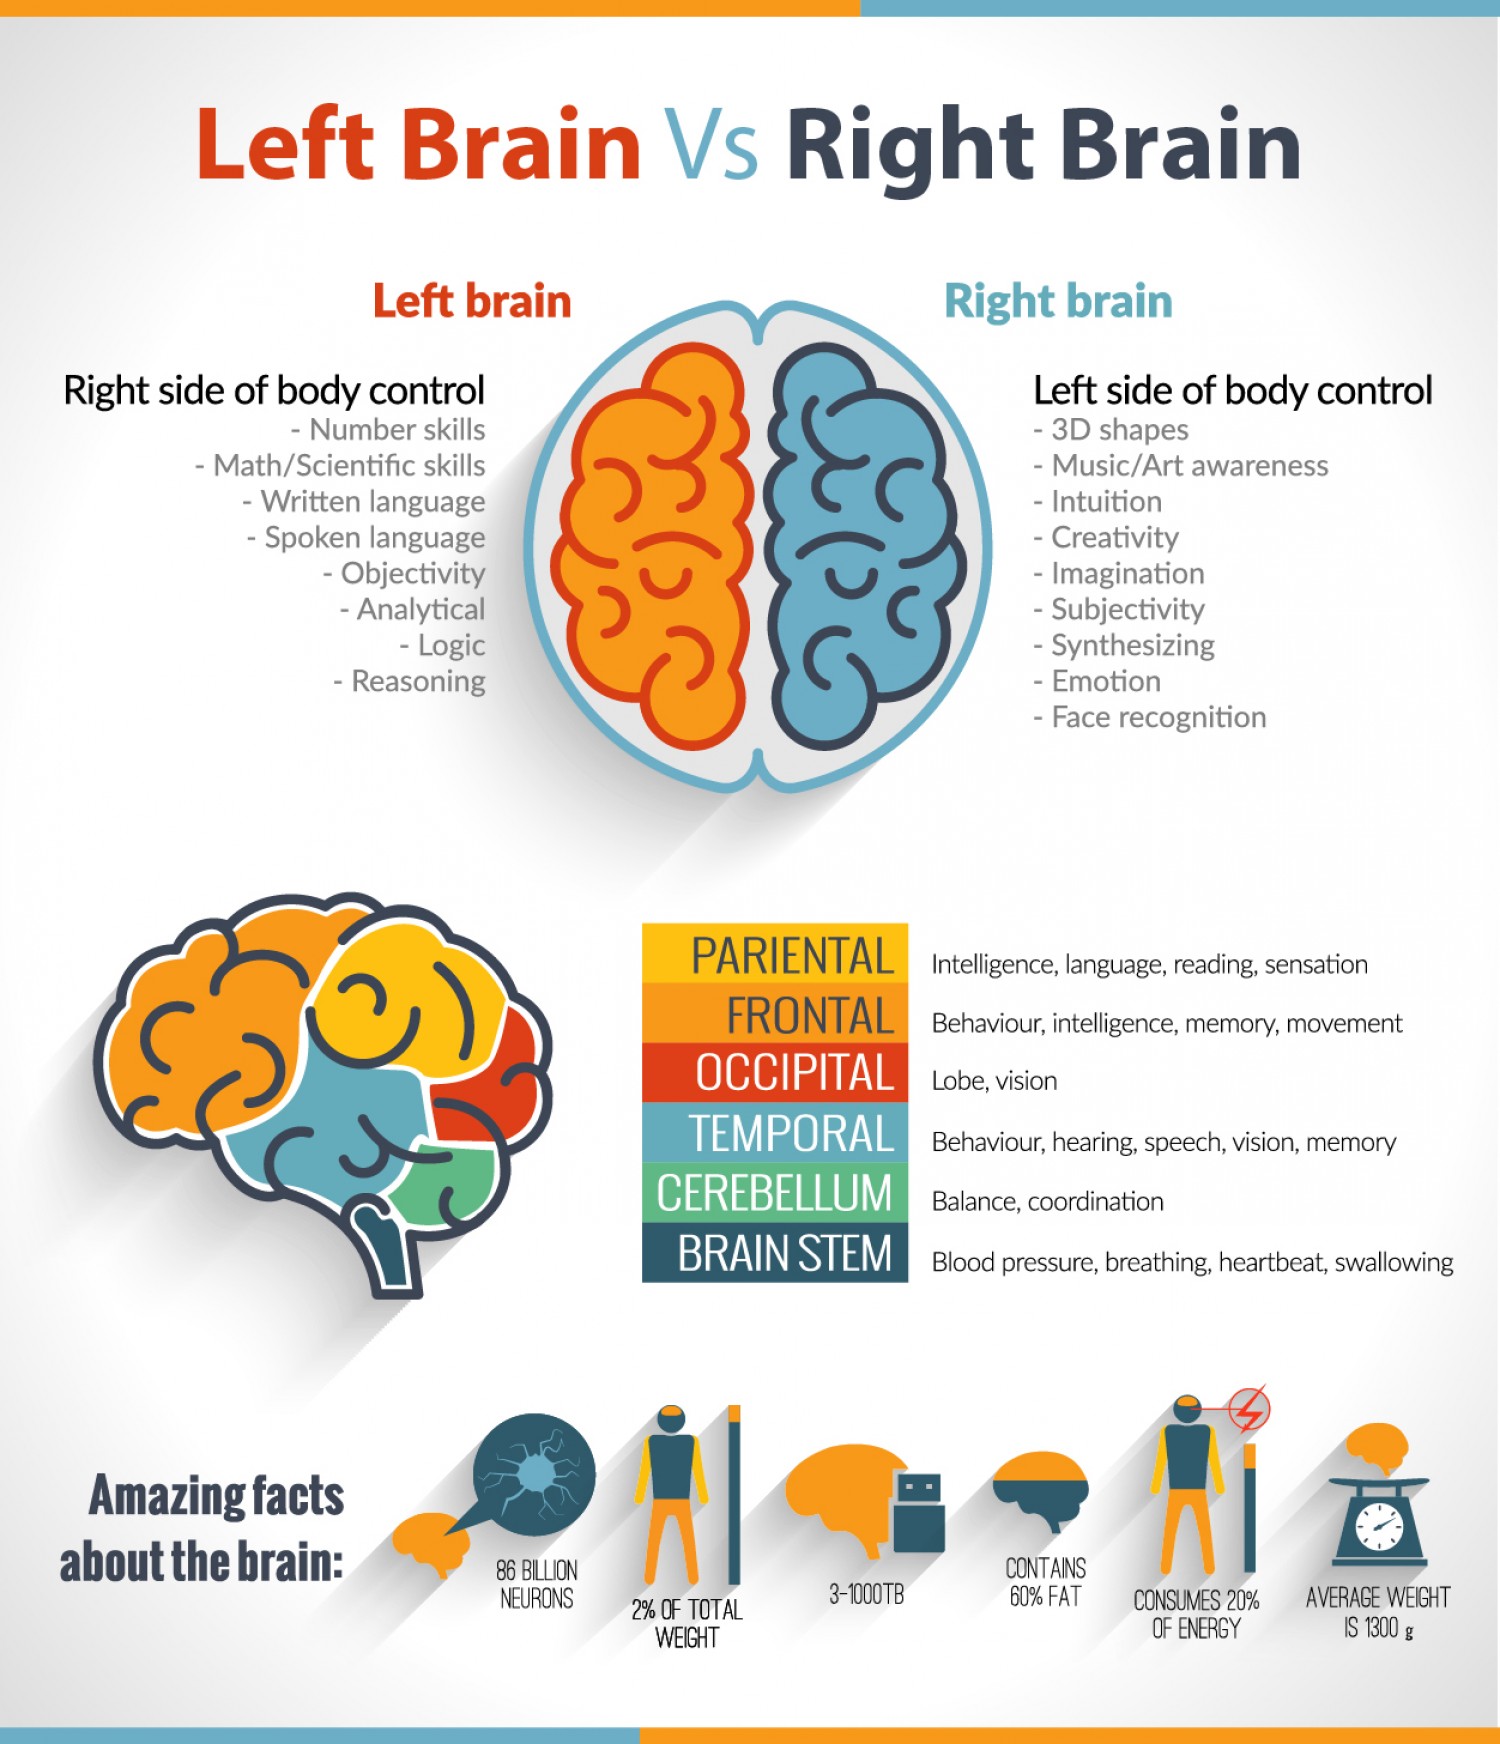 Brain Power Comparison between left-handed people and right-handed people